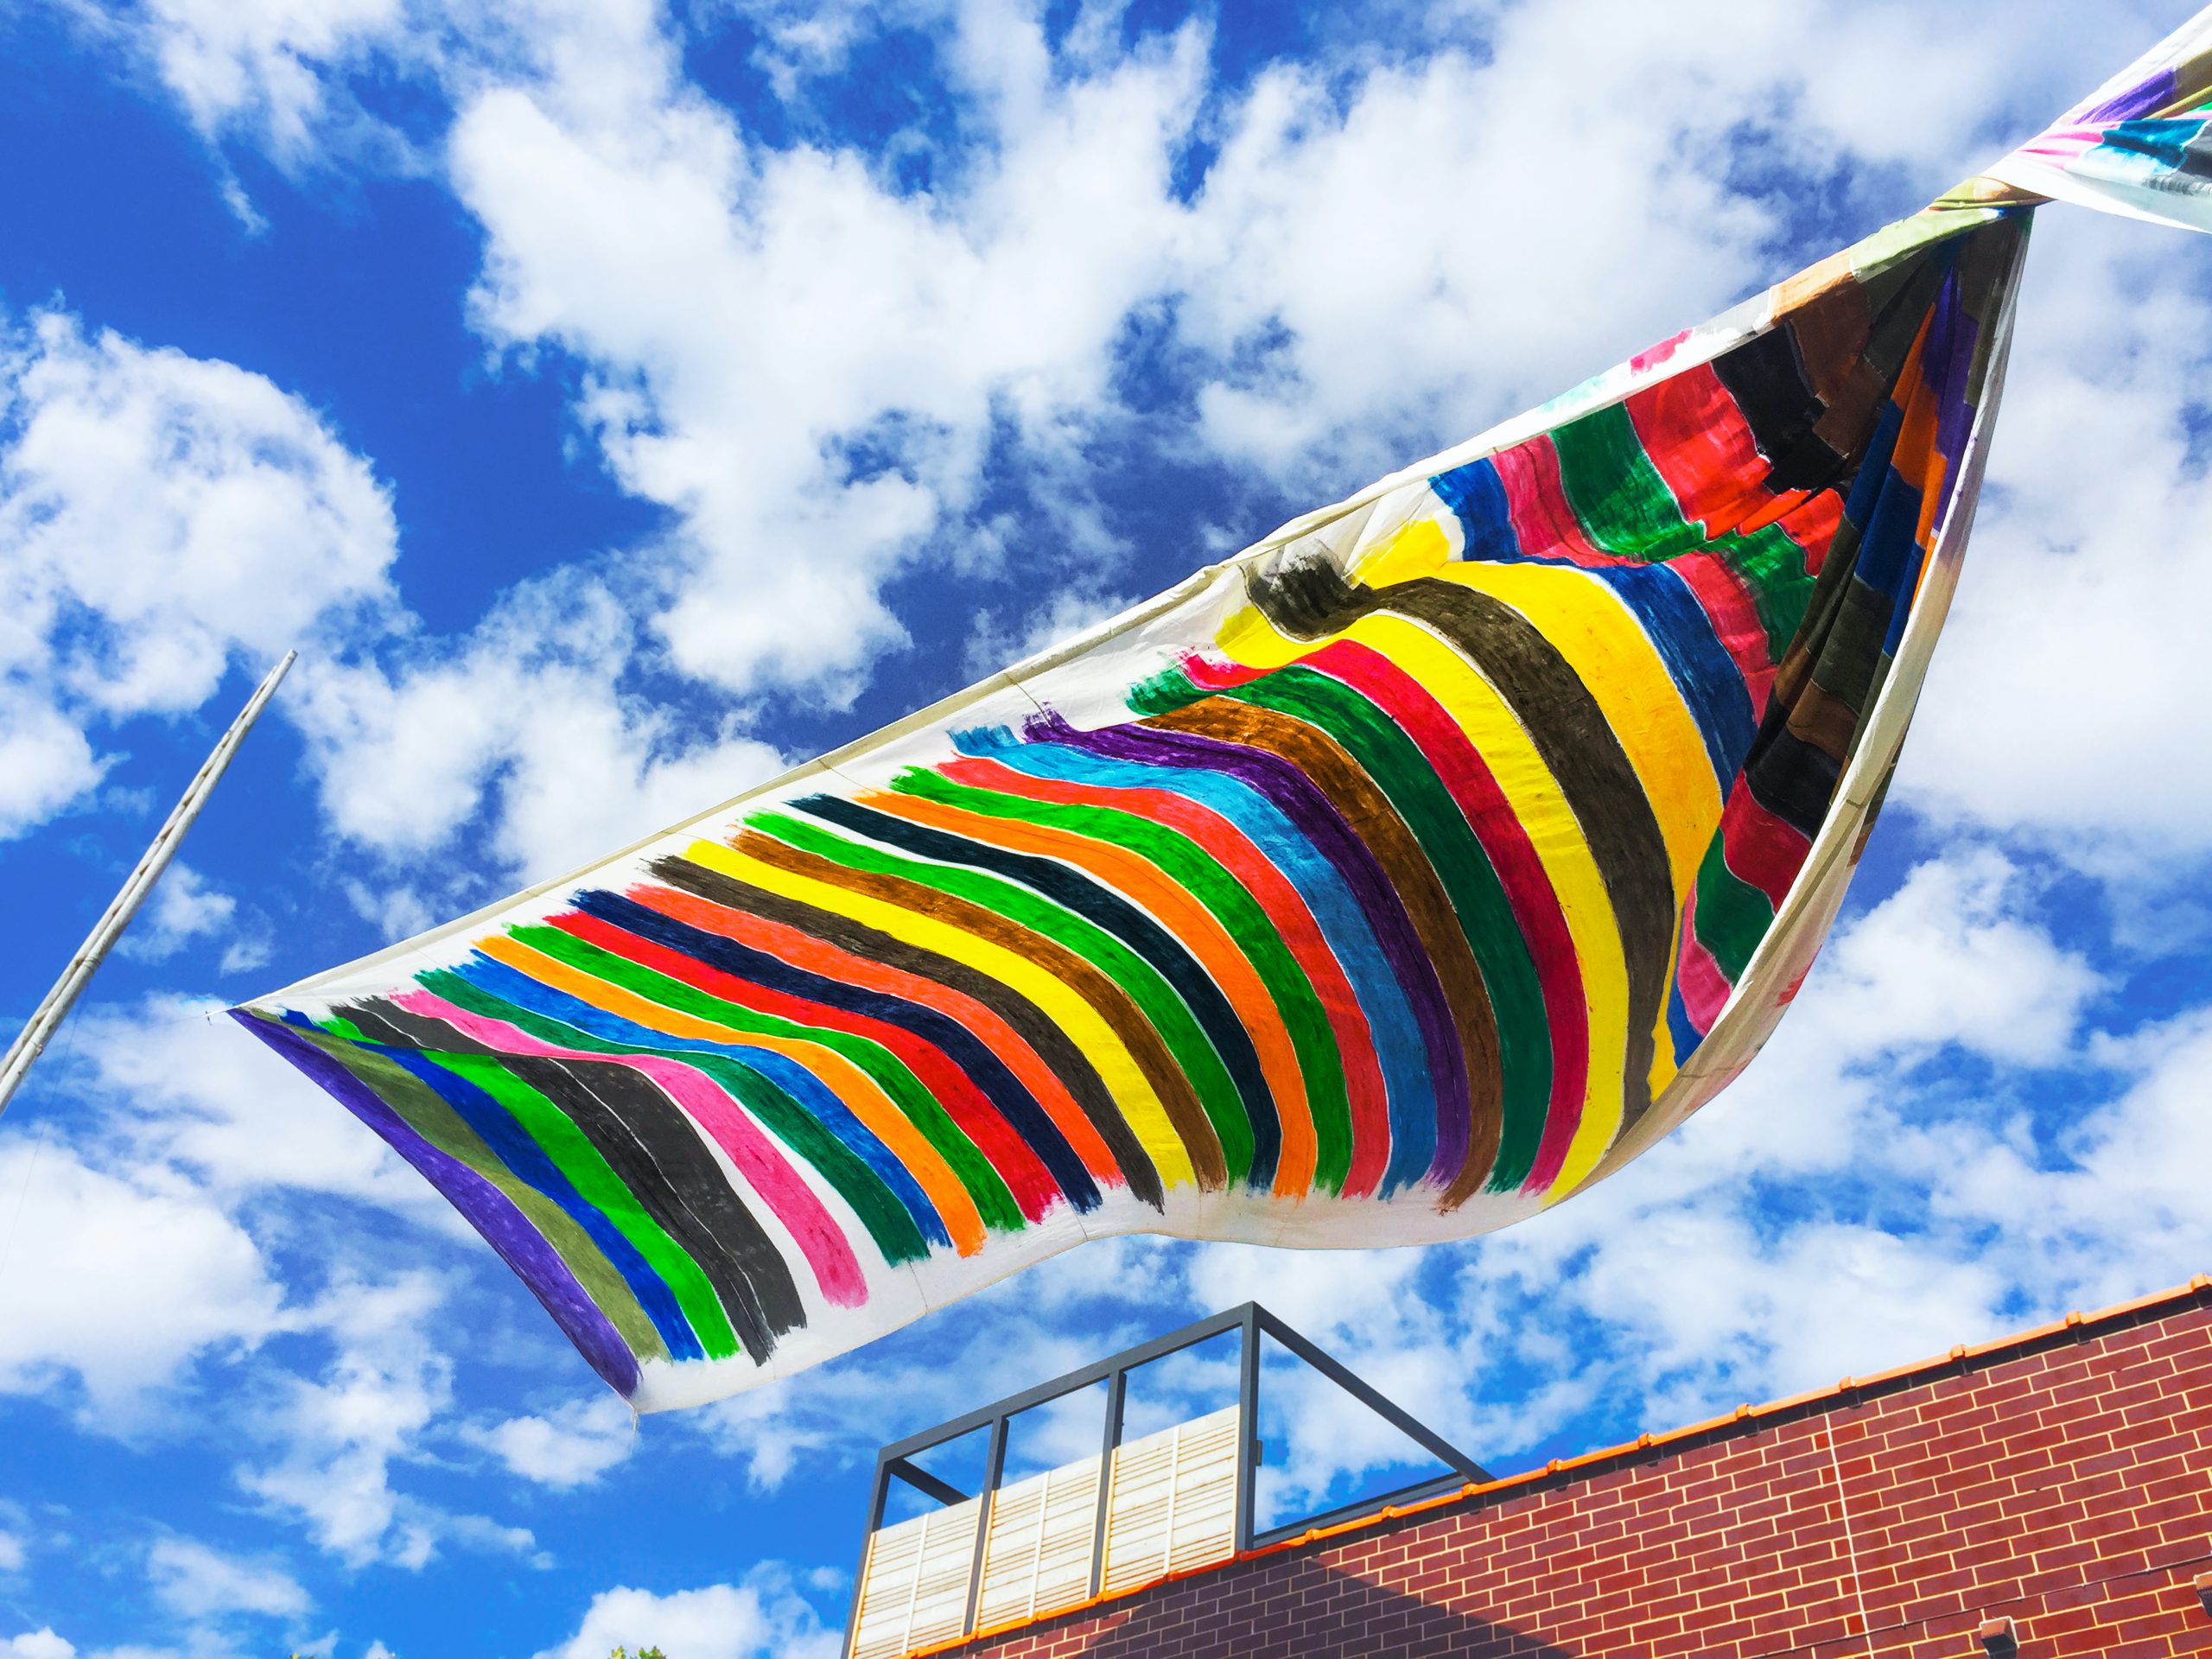 A banner of painted stripes waft over a rooftop in Chicago's Ukrainian Village as a symbol of unity and diversity.